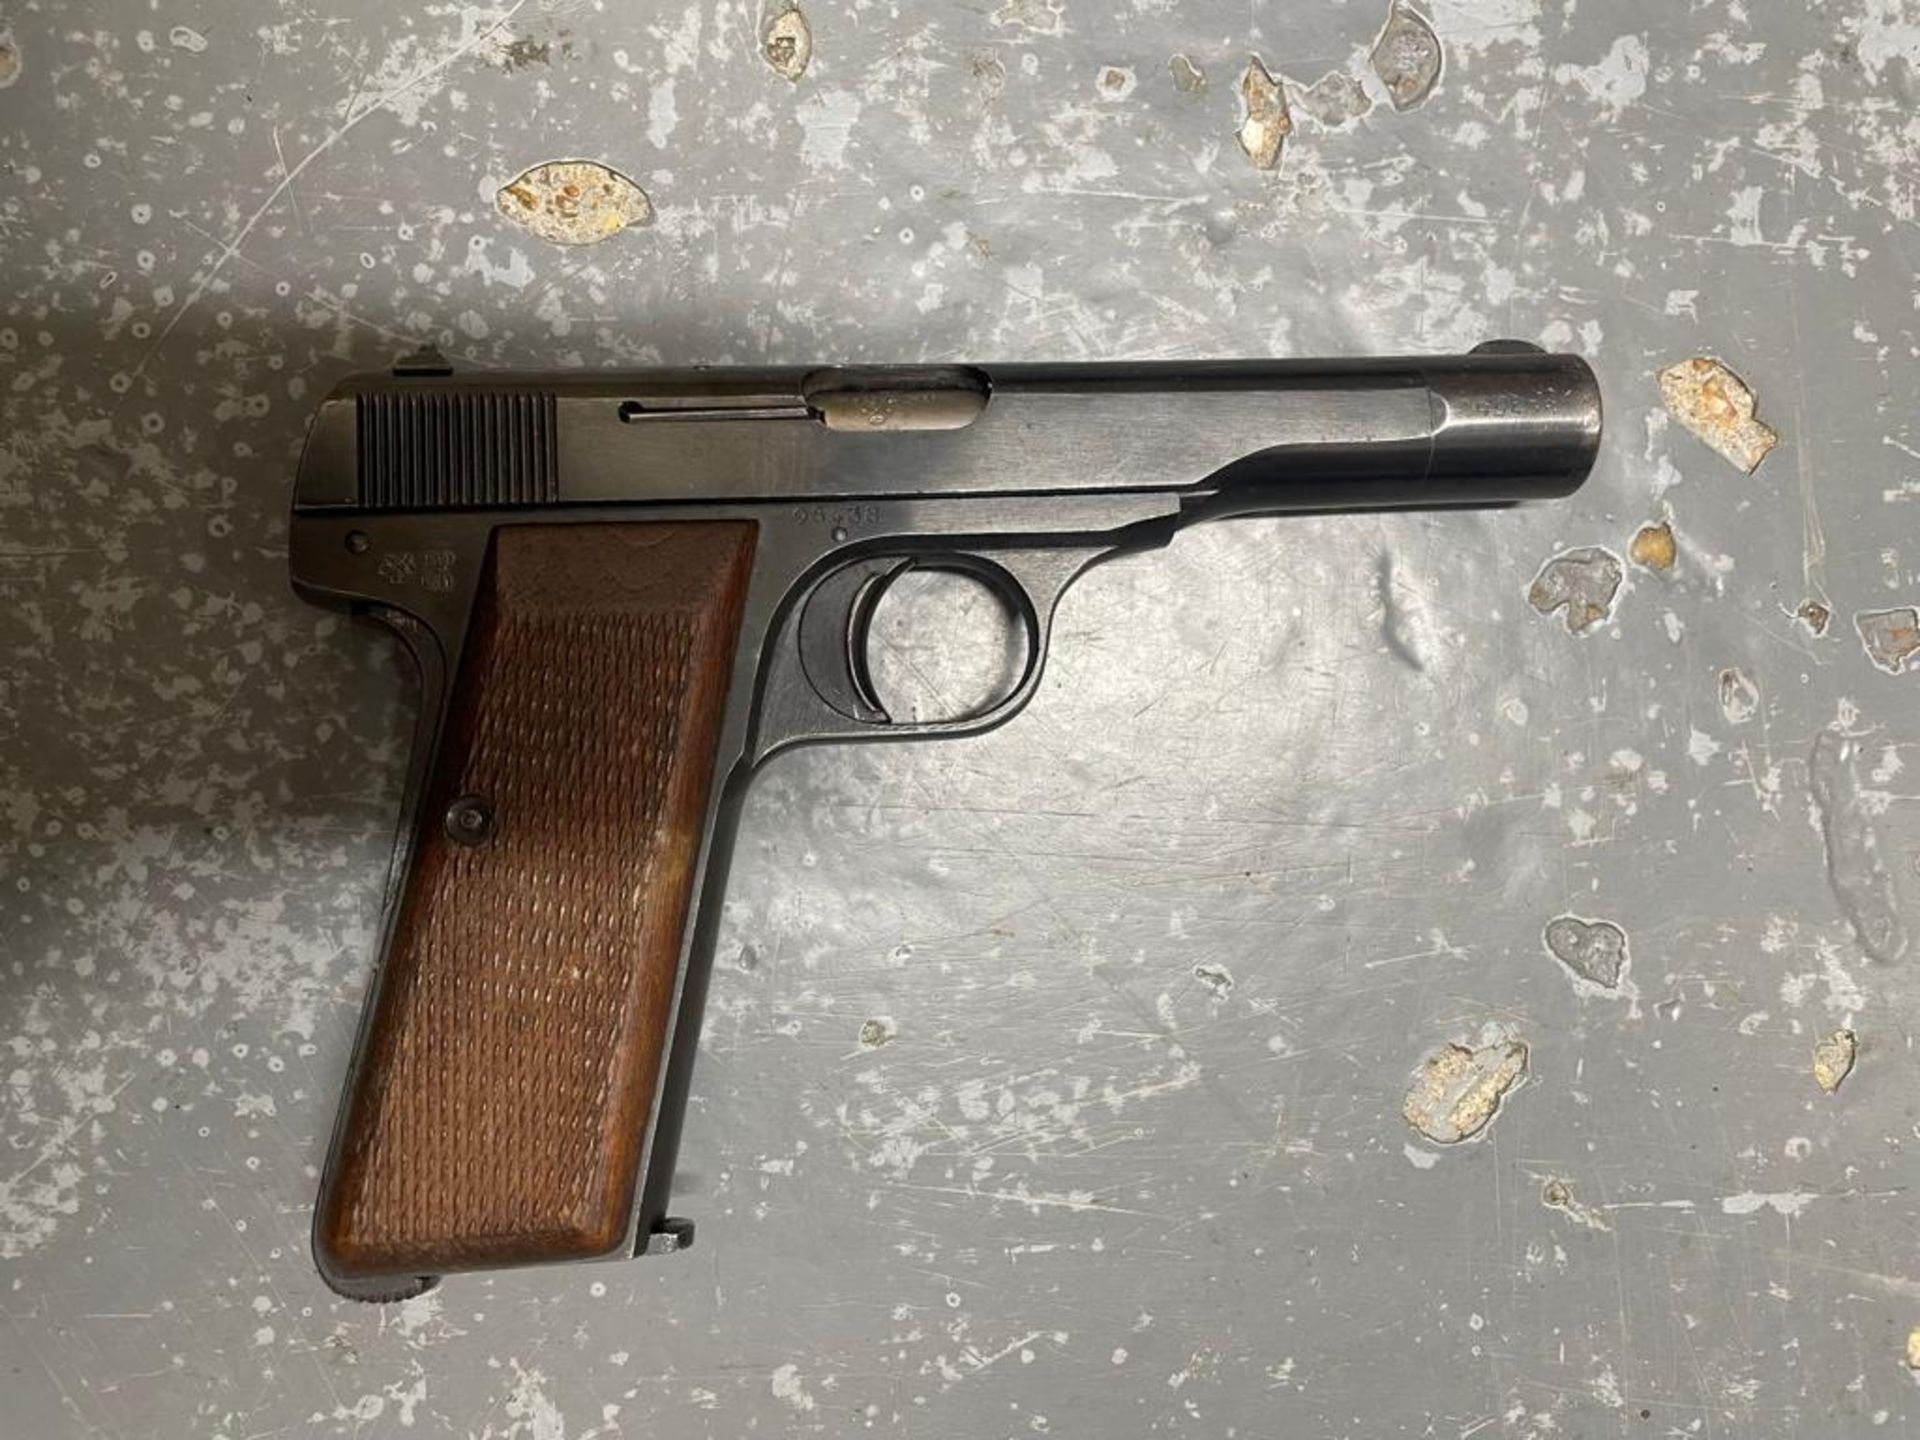 A deactivated WWII German pistol marked FN1922.